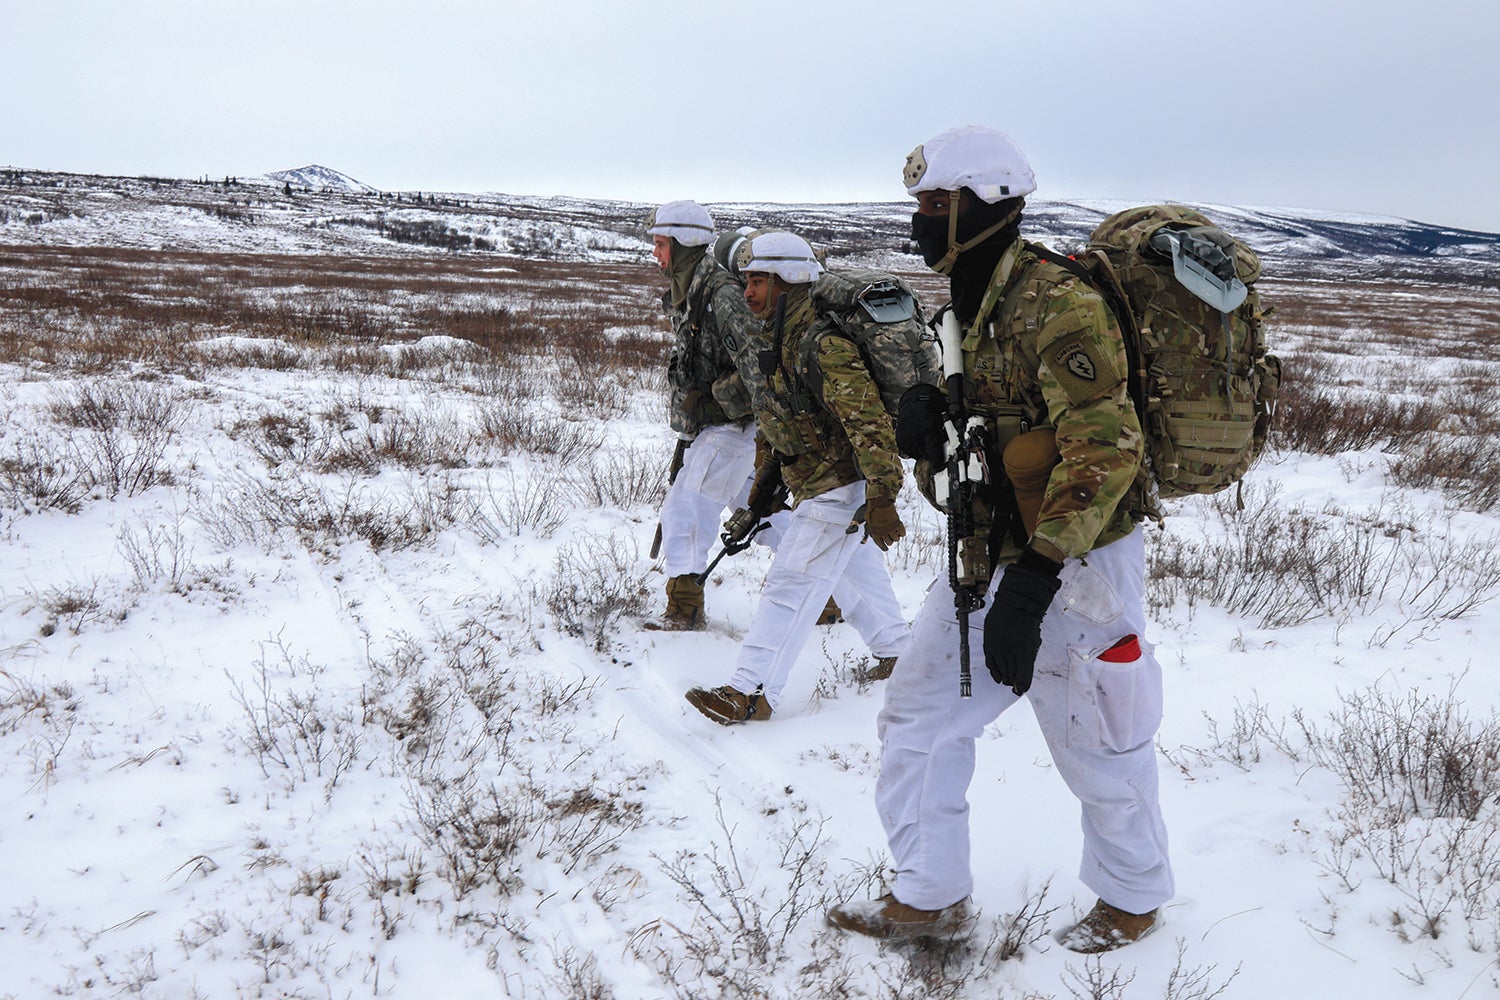 Paratroopers from the 4th Brigade Combat Team (Airborne), 25th Infantry Division, move to their assembly areas after conducting an airborne infiltration near Fort Greely, Alaska. (Credit: U.S. Army/Maj. Jason Welch)